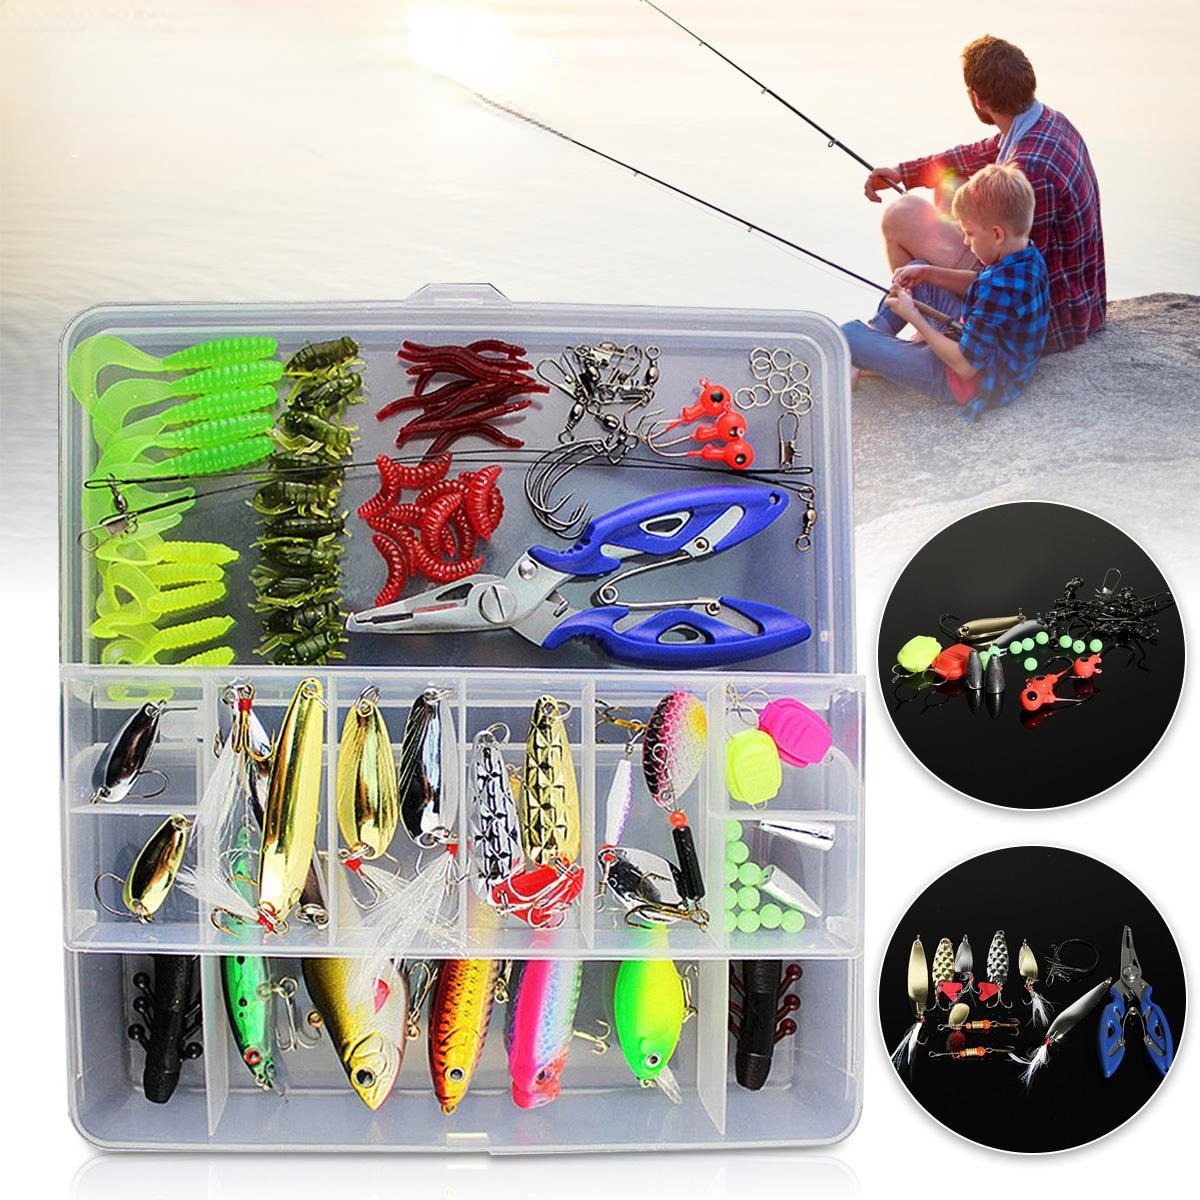 101Pcs Fishing Lure Spinners Plugs Spoons Soft Bait Pike Trout Salmon+Box Set